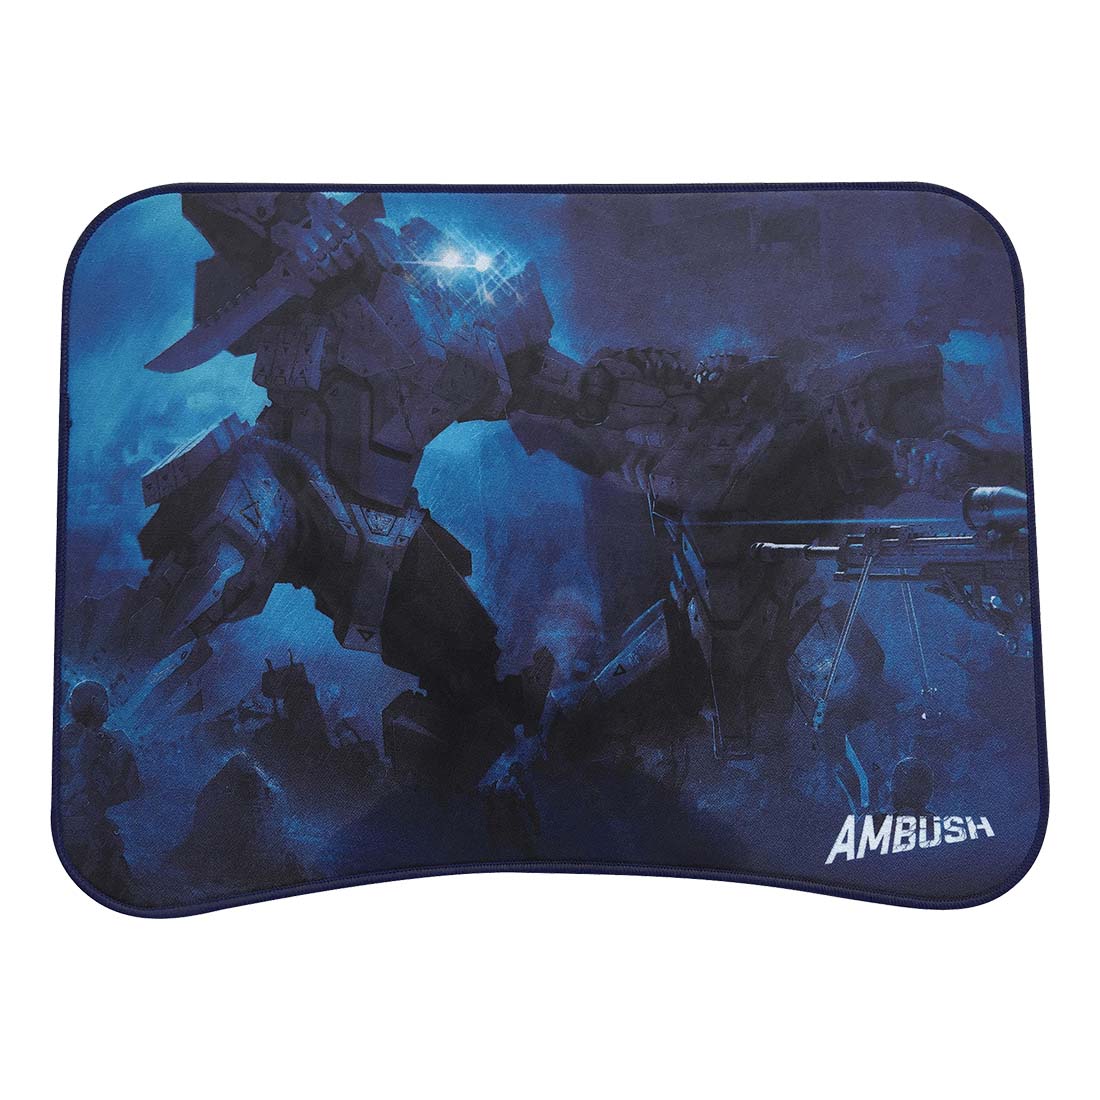 YENKEE YPM3009 GAMING MOUSE PAD